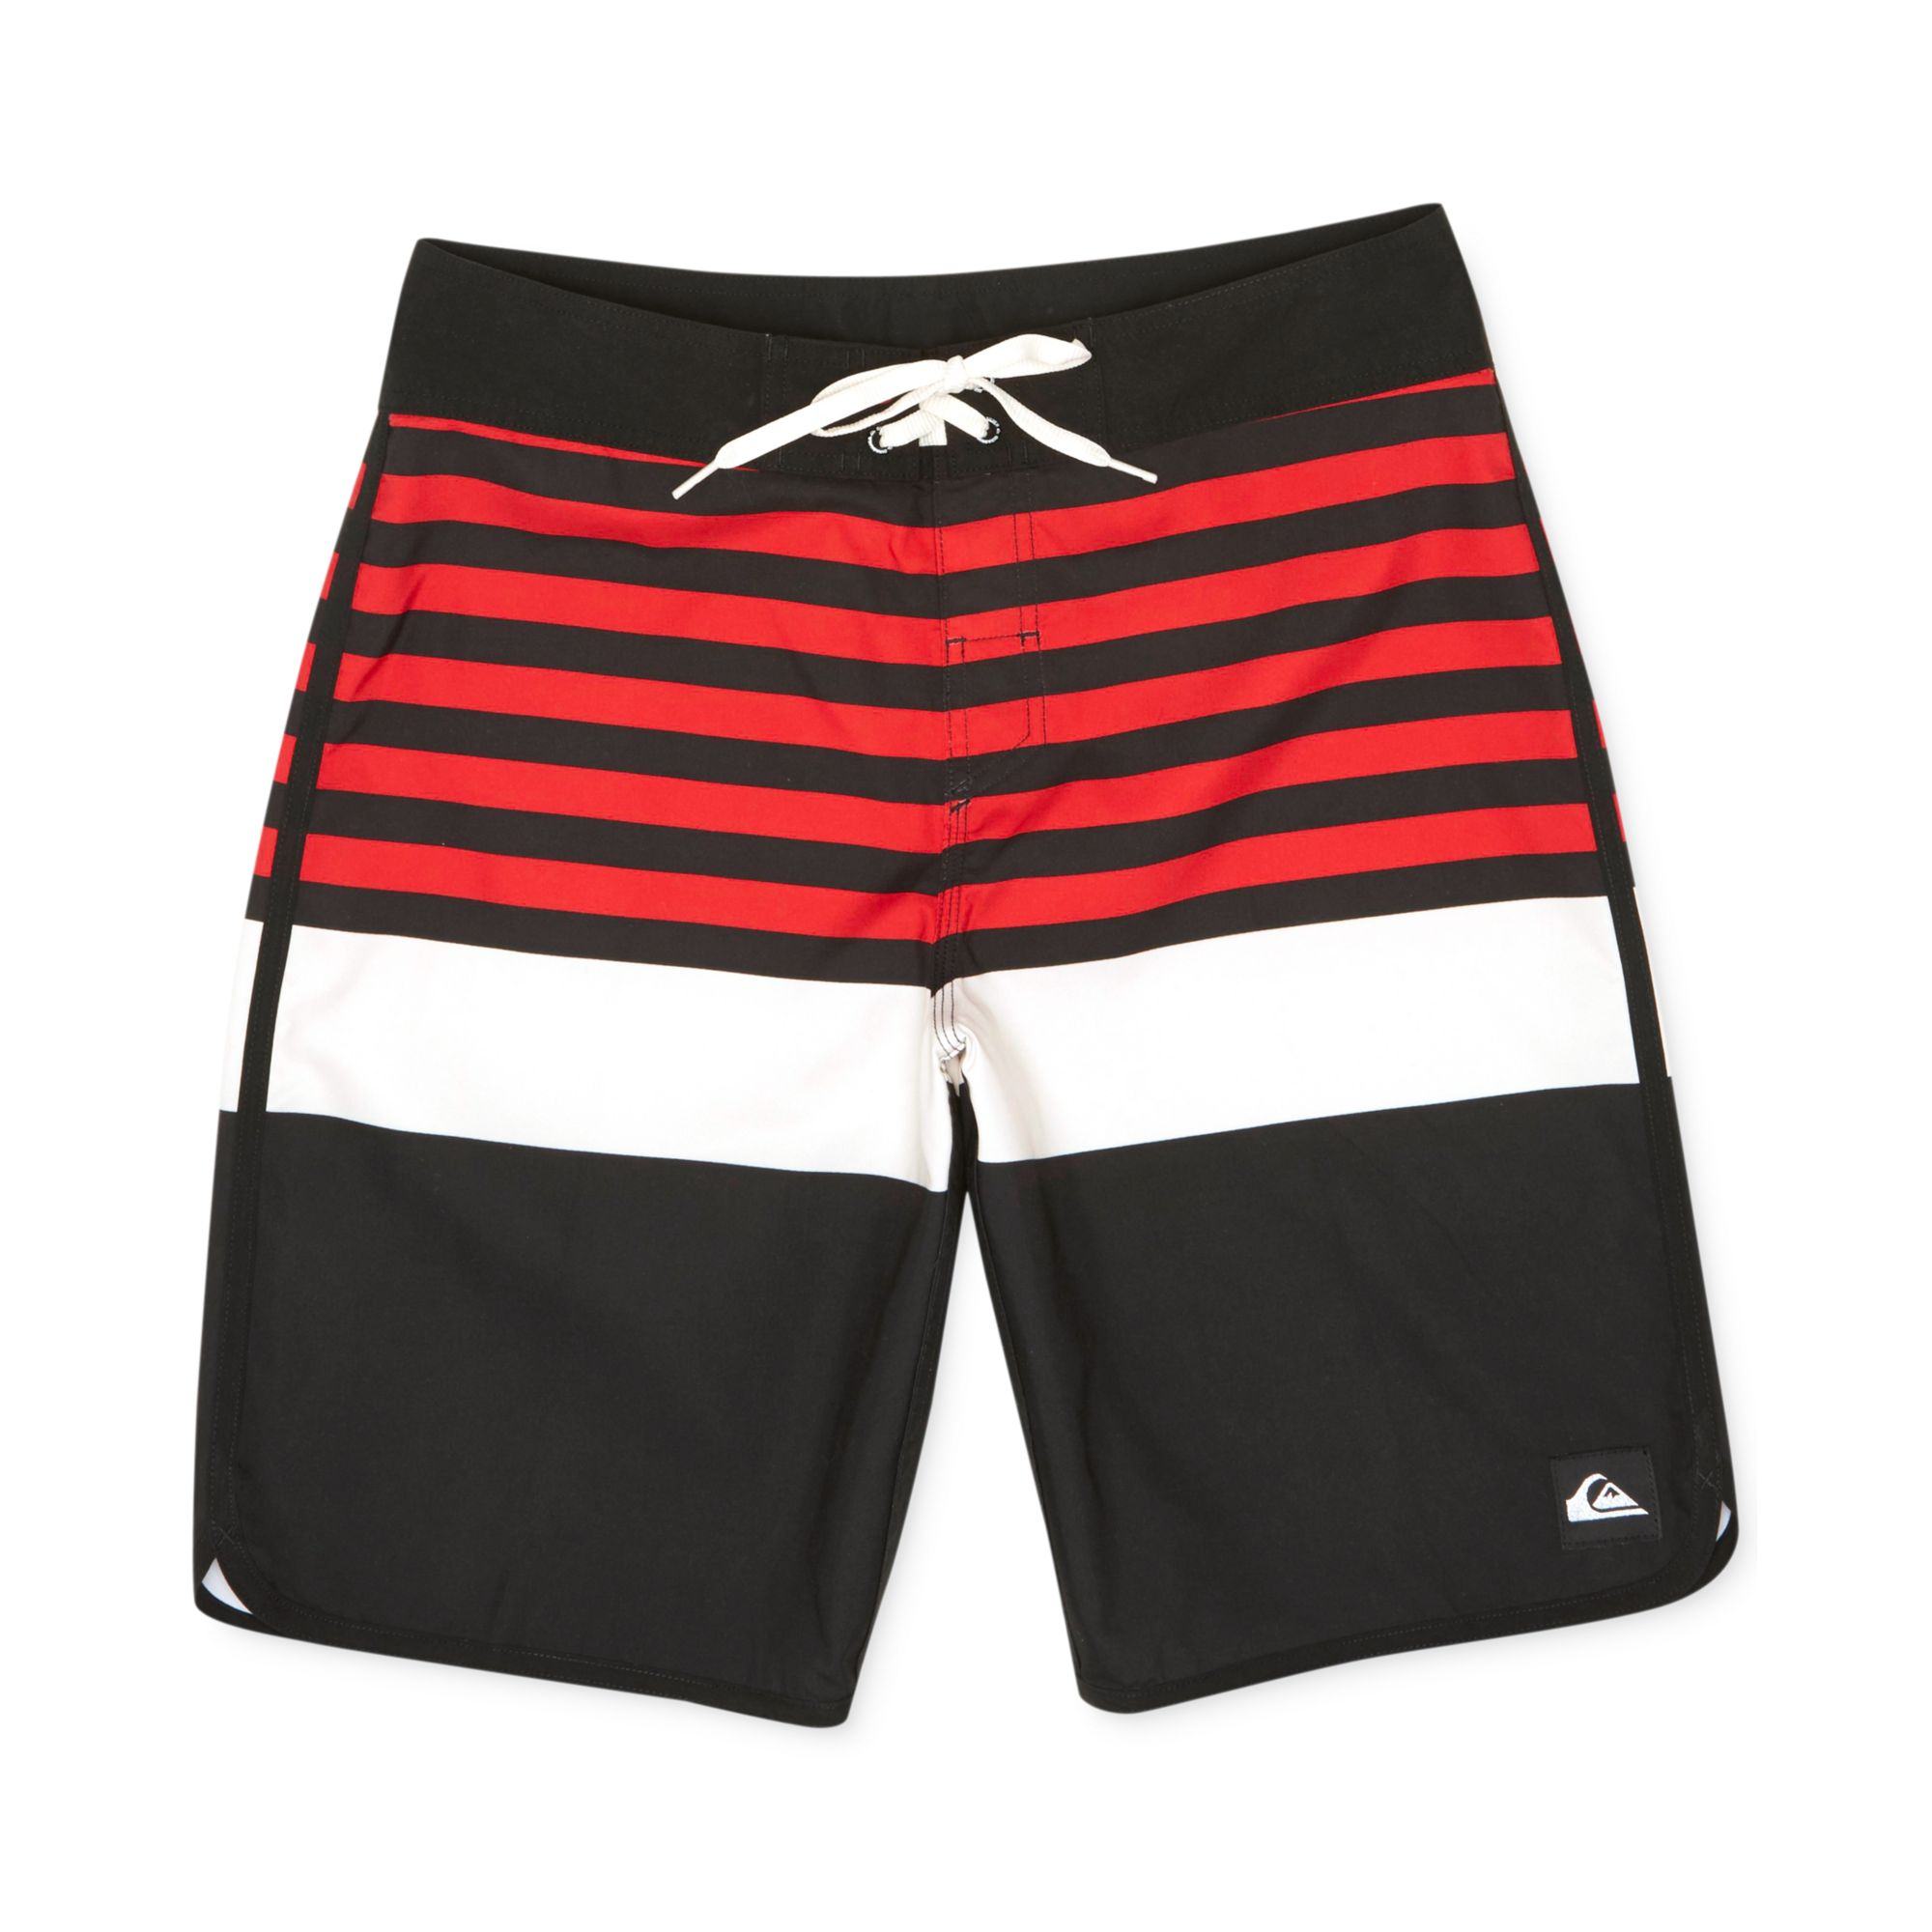 Lyst - Quiksilver Way Out Scallop Board Shorts in Red for Men
 Quiksilver Shorts Red